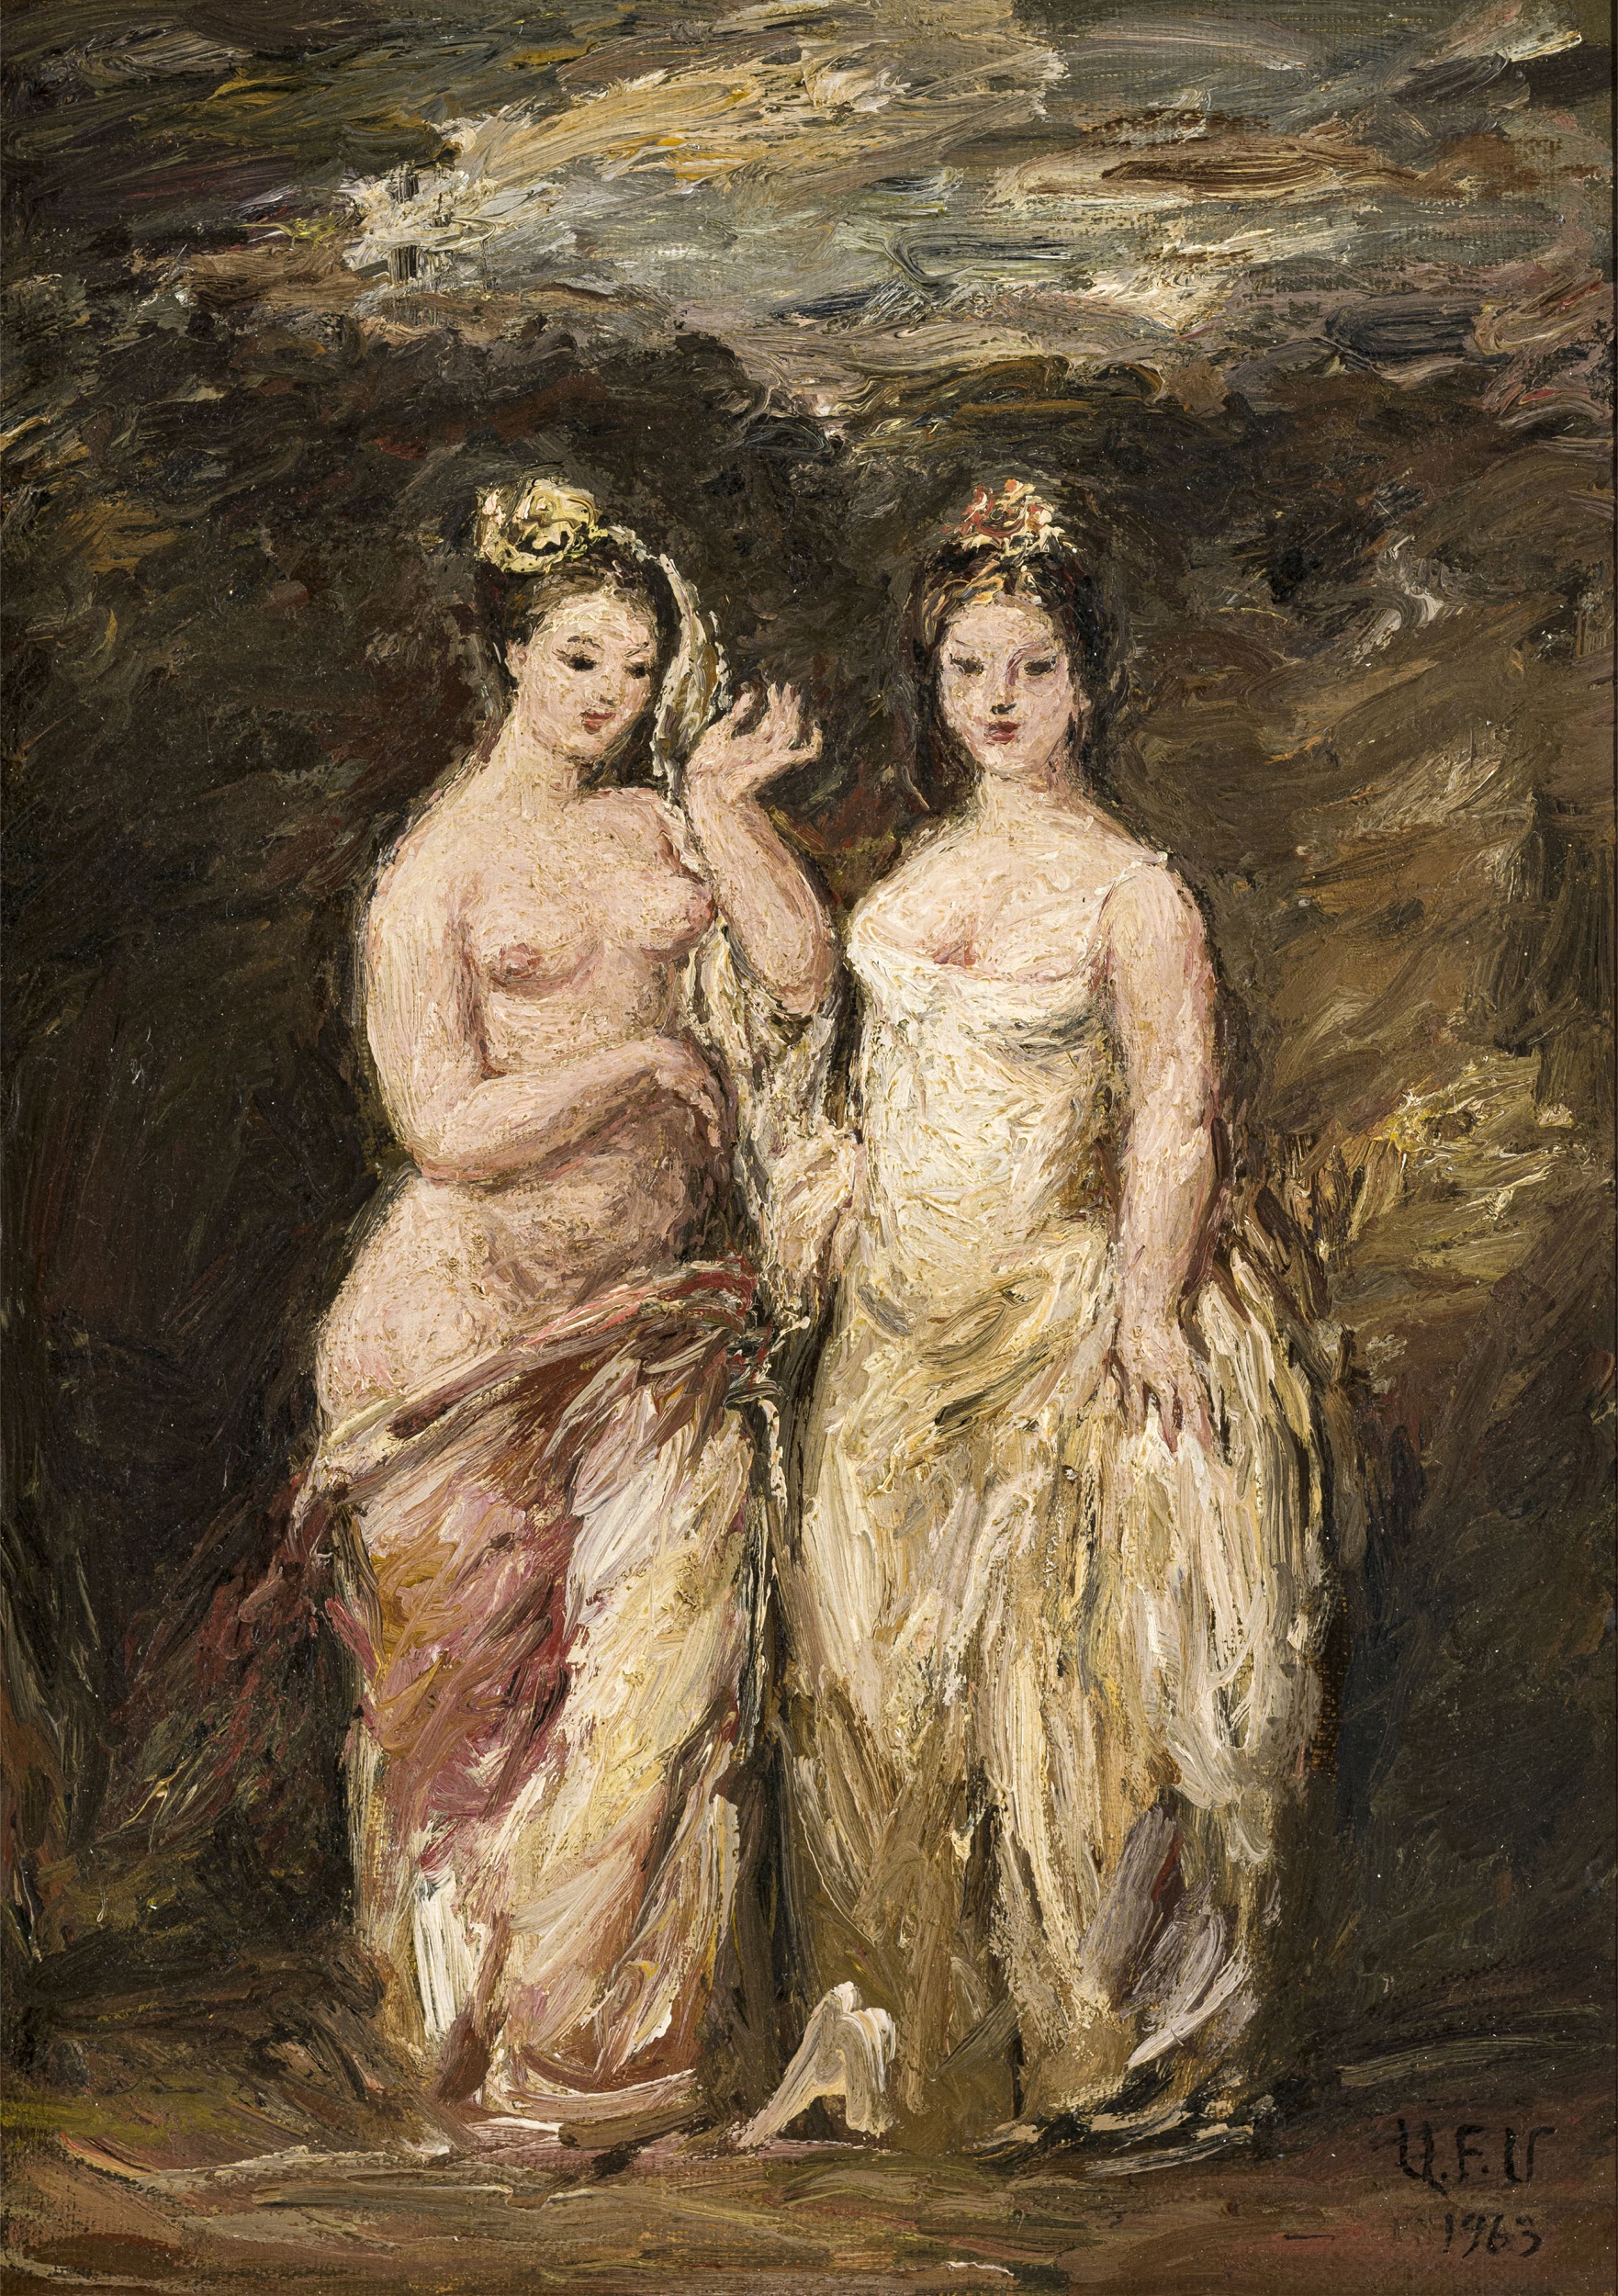 “Composition of Two Young Women”